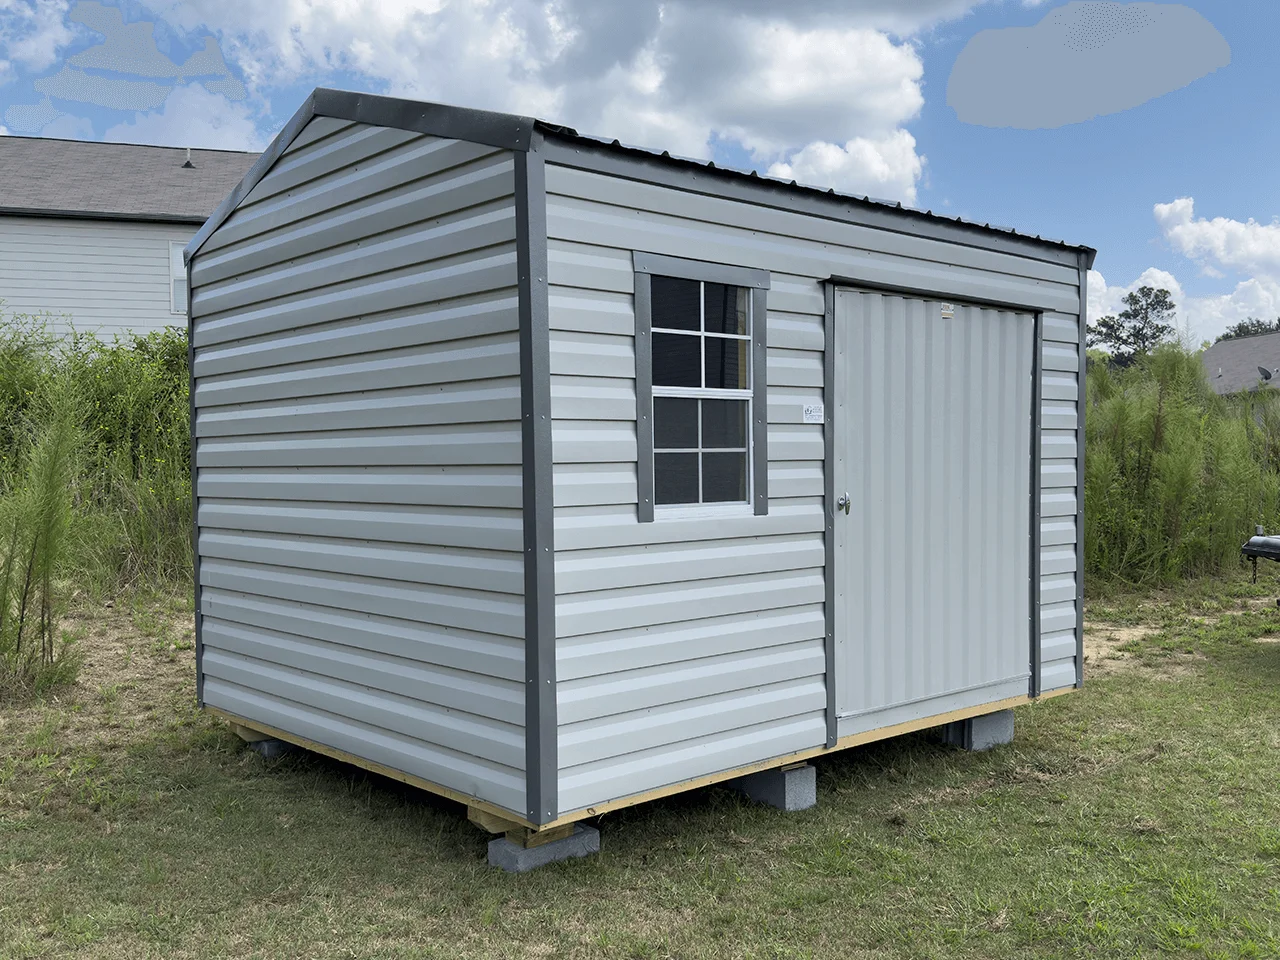 10 x 12 portable shed building with lap siding equipped with wide door for mowers and a window.